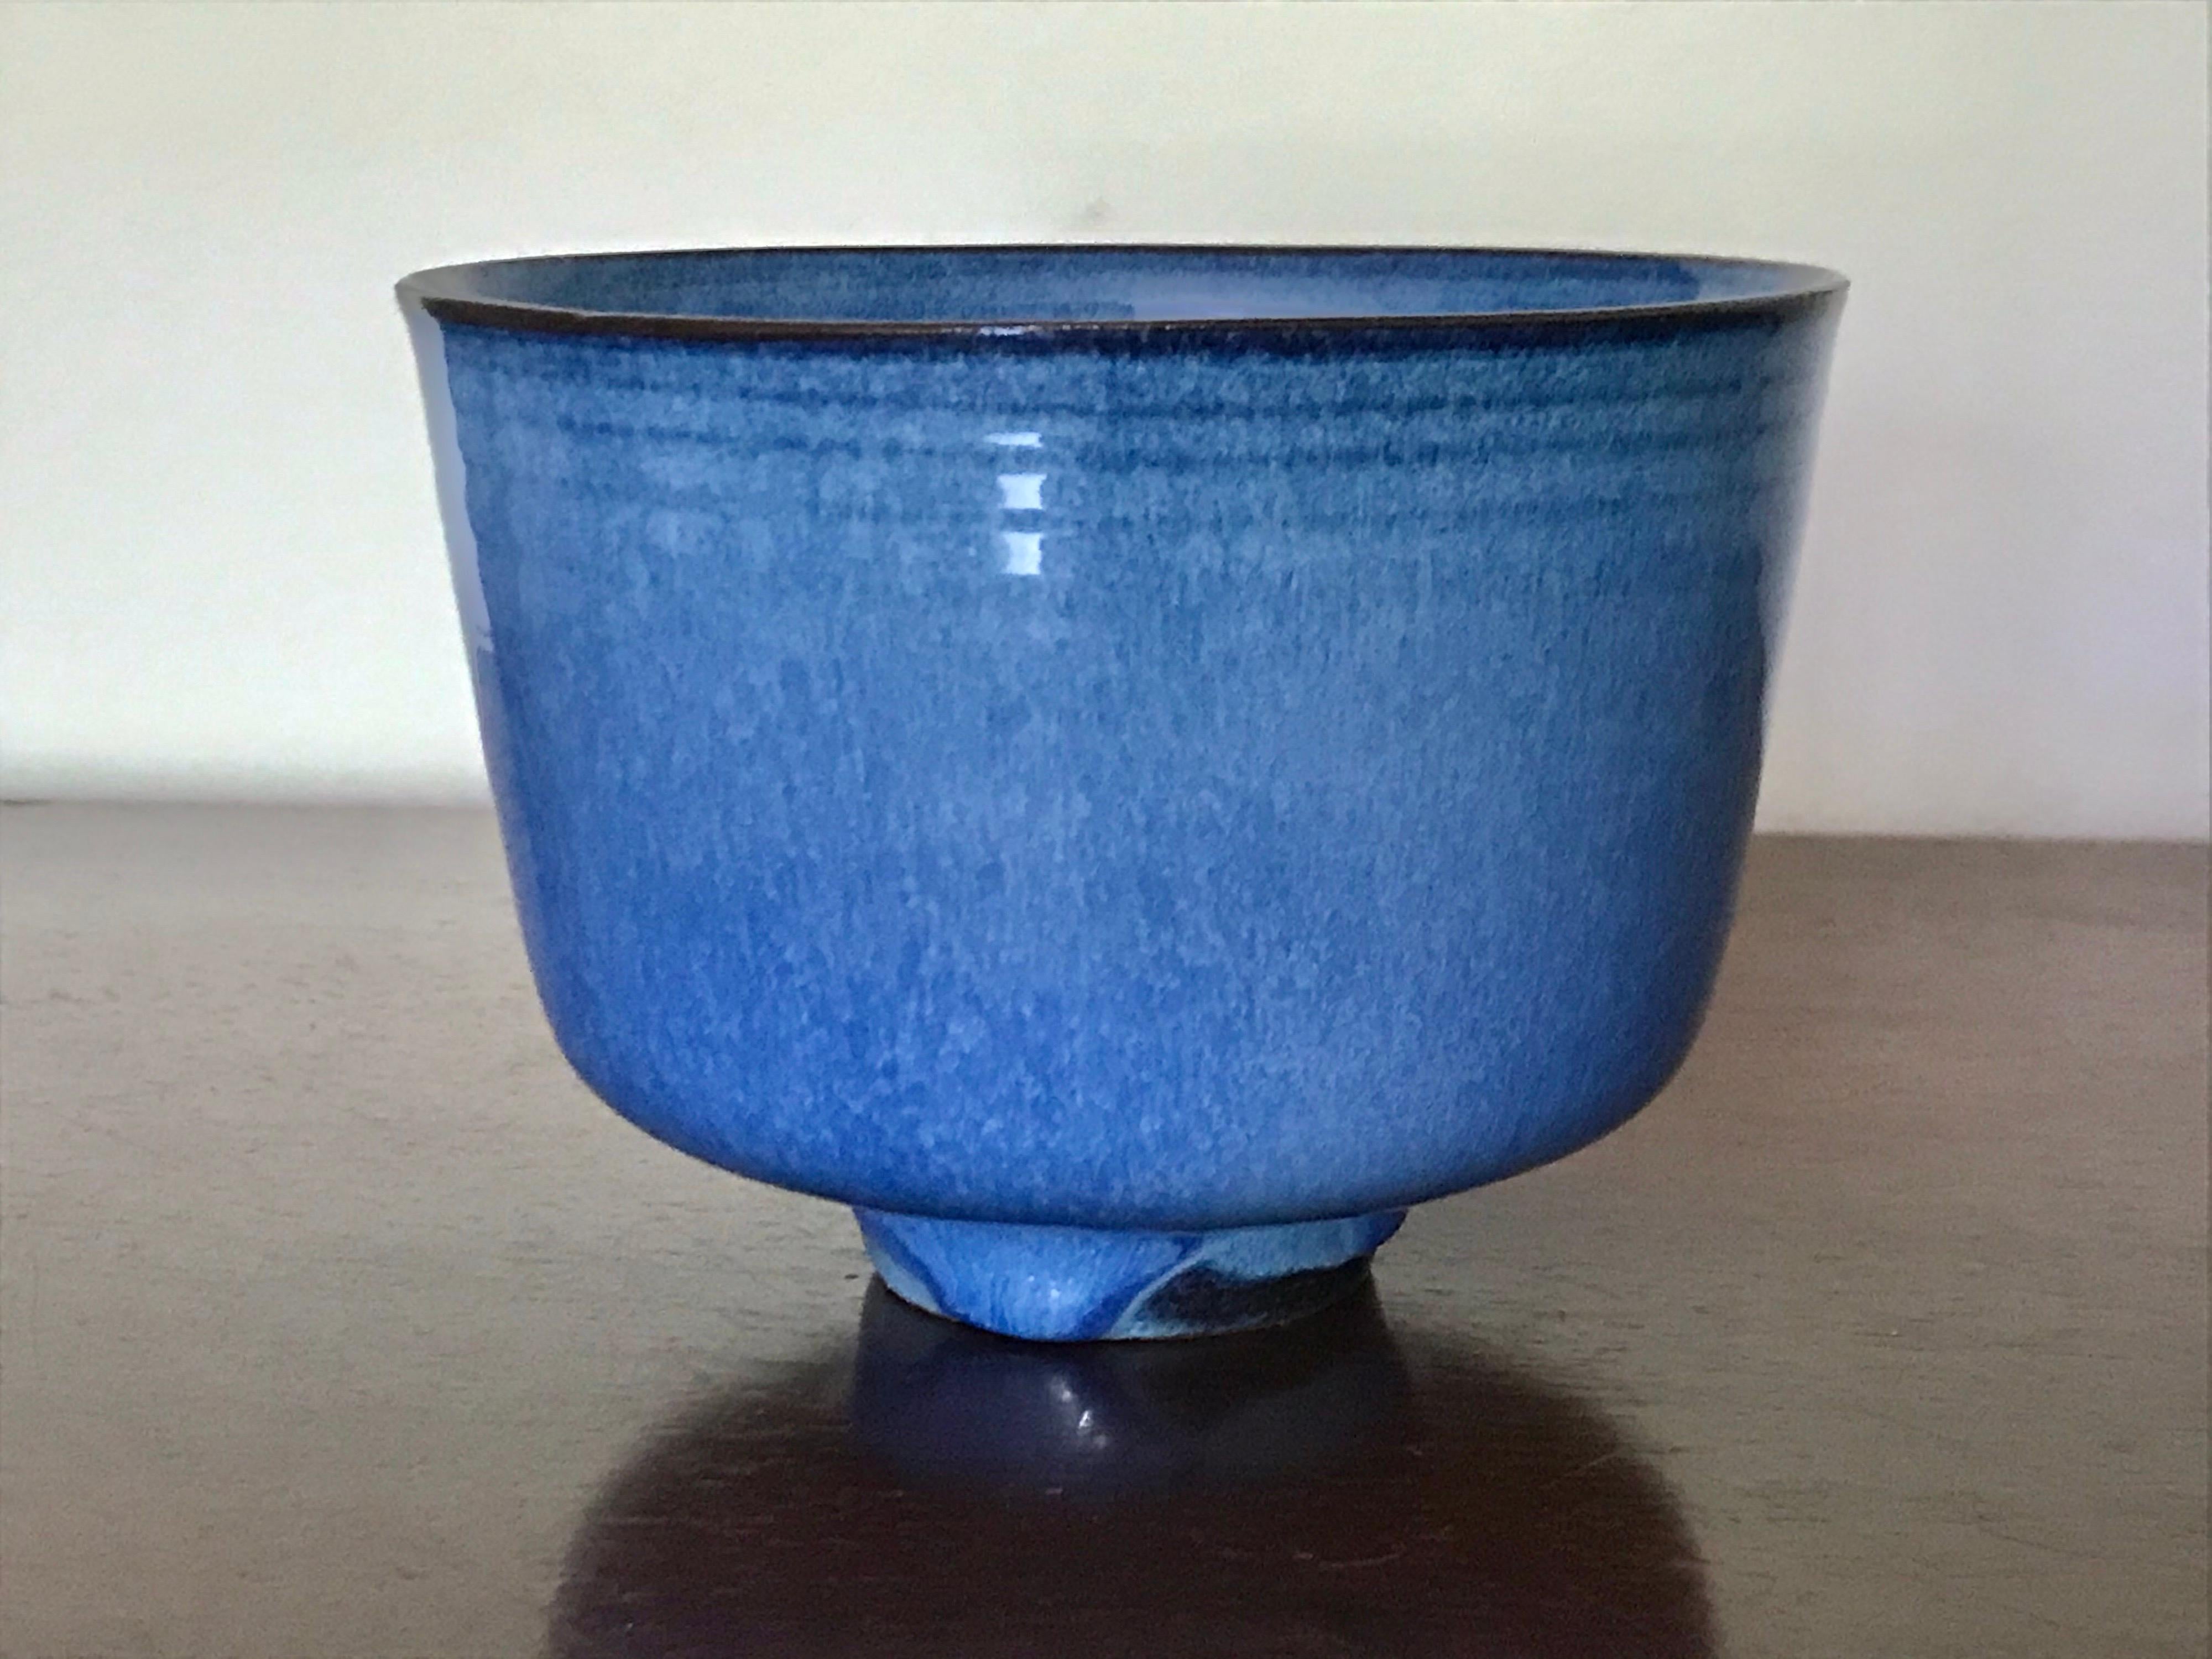 The Natzlers moved to Los Angeles from Austria in 1938. They were trained artisans. She made the simple pristine pot forms and he made the amazing glaze designs.
This piece is another exceptional example of both of their applied techniques.
Wheel